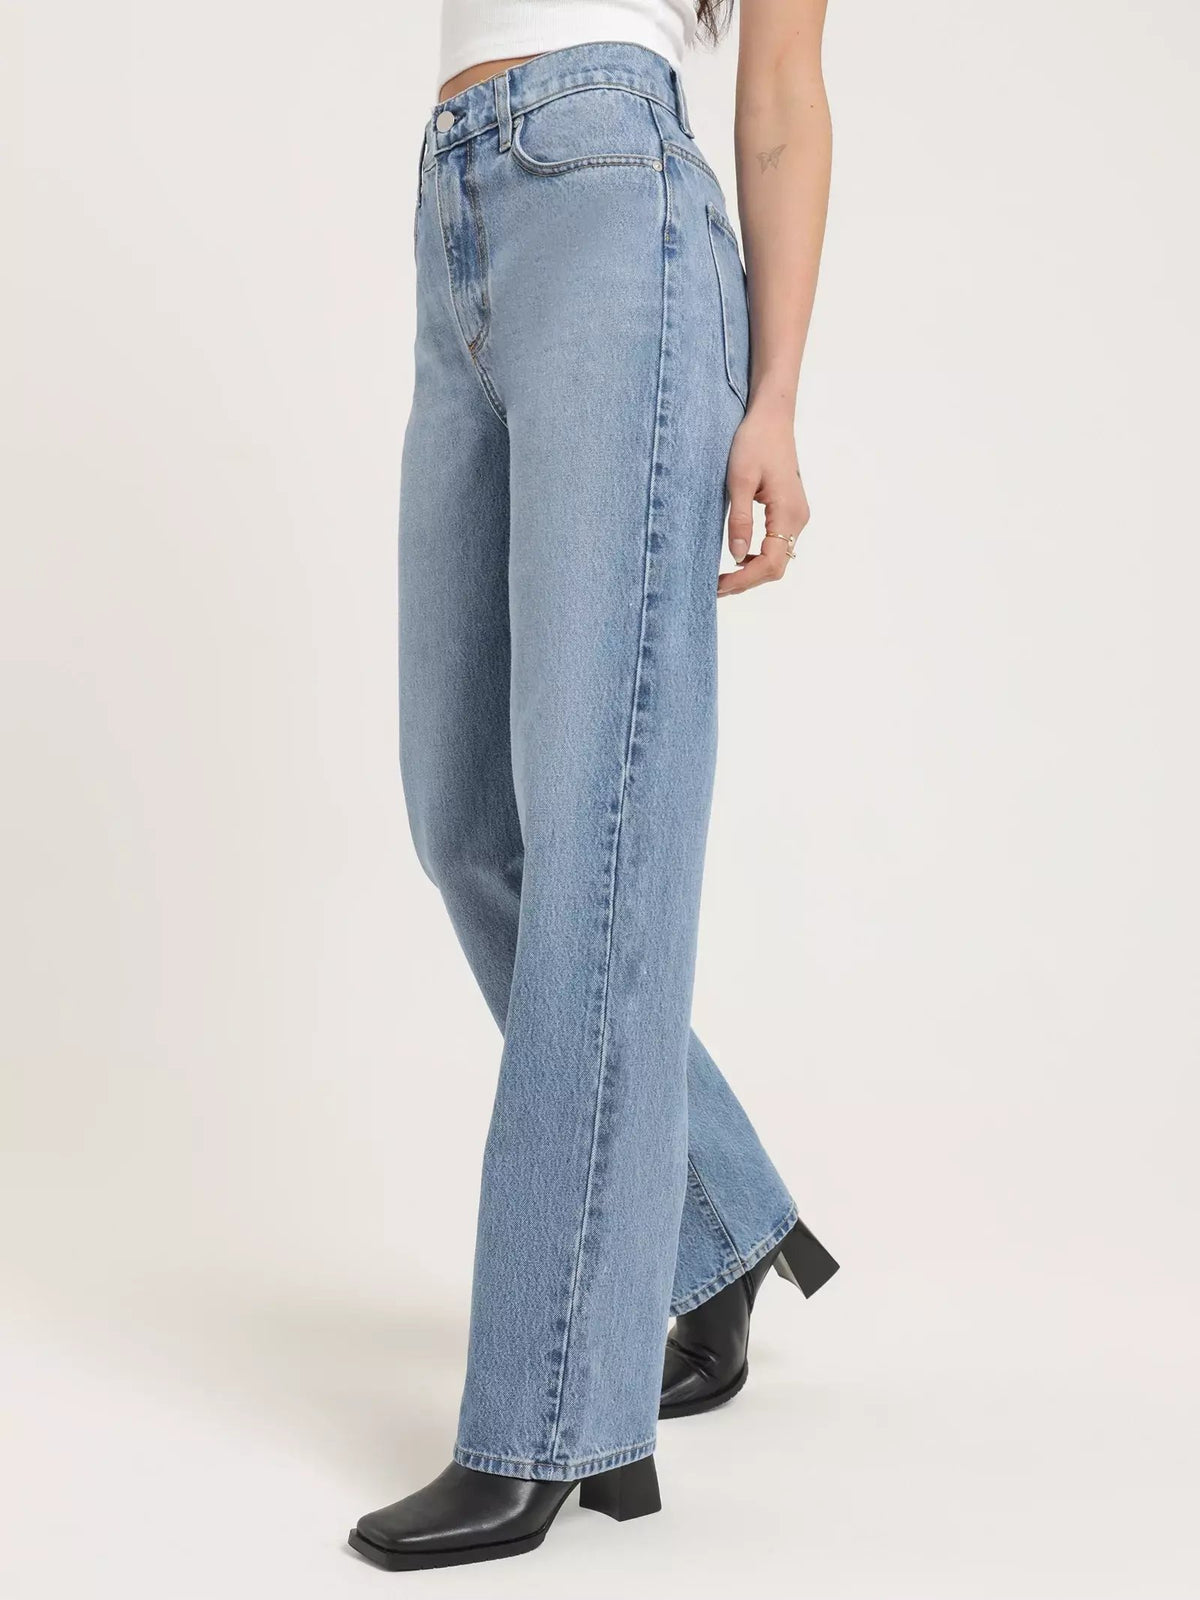 Lou Jeans in Forever Blue